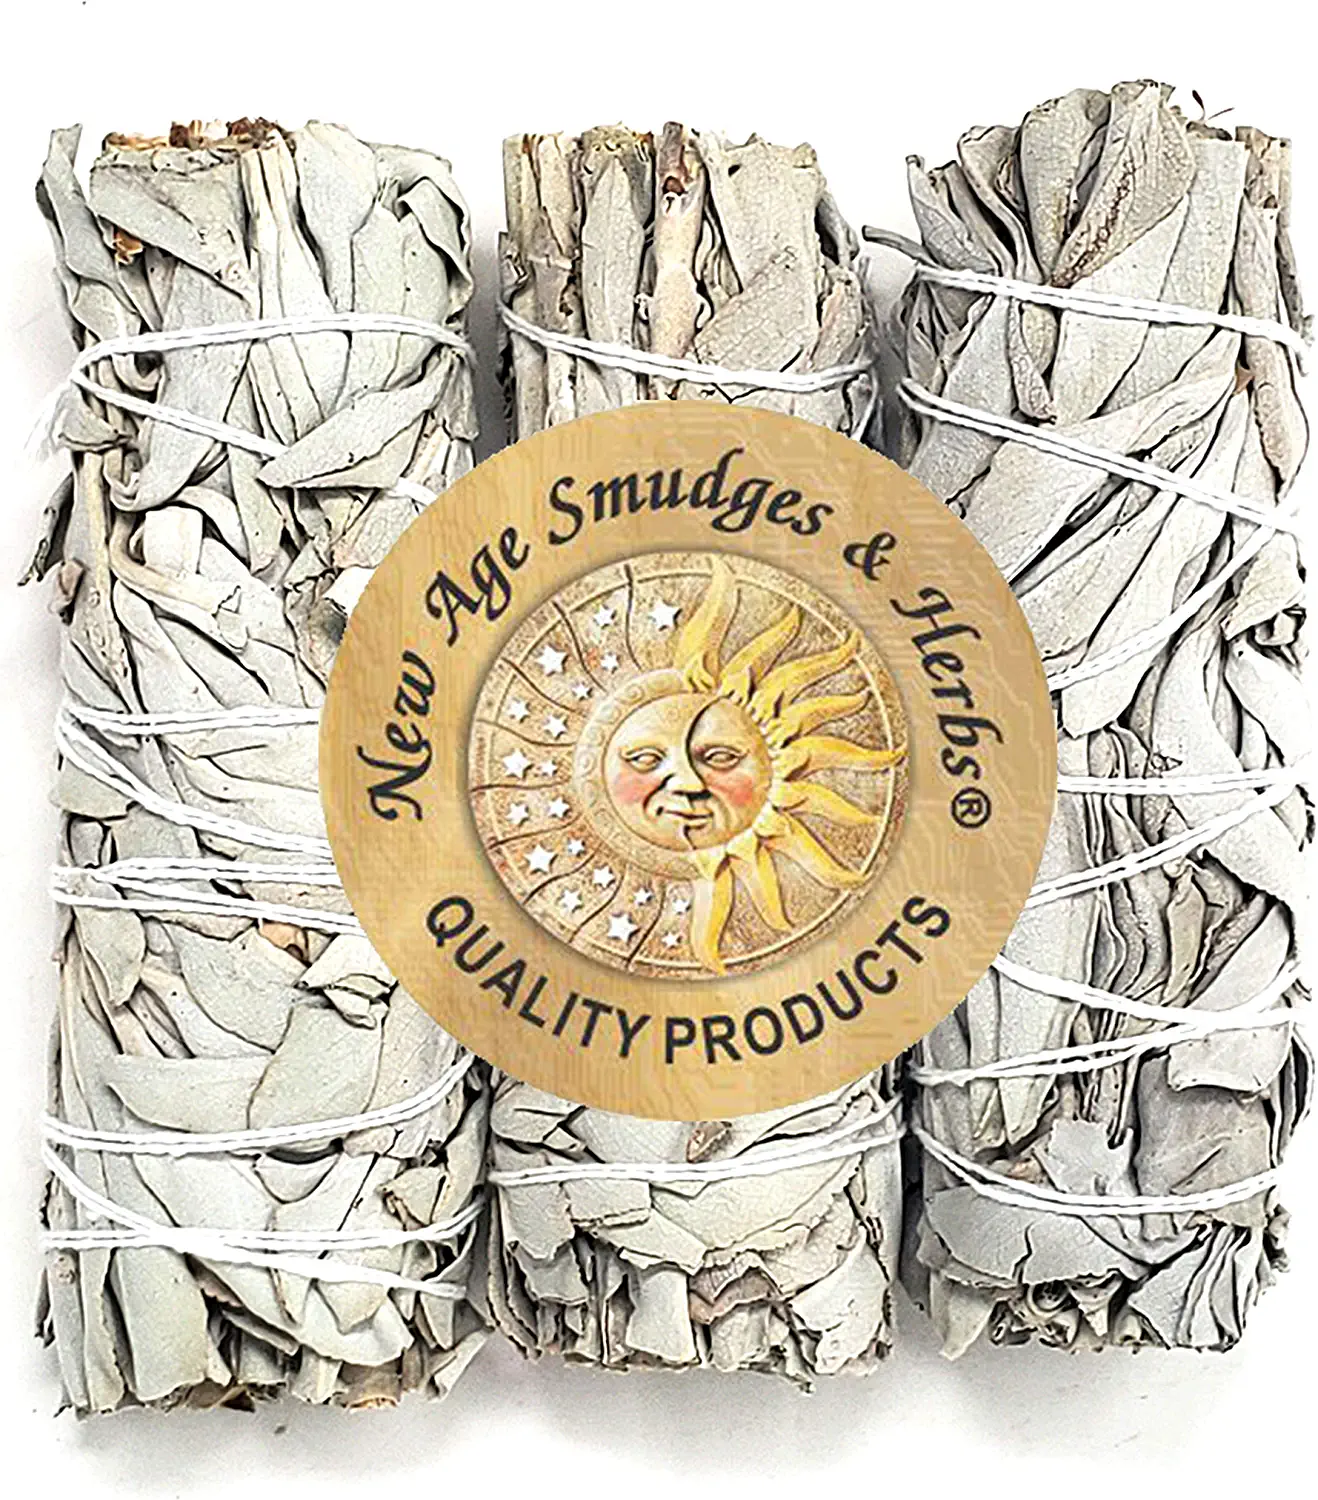 New Age Smudges & Herbs Organic White Sage Smudge Sticks, 3-Pack